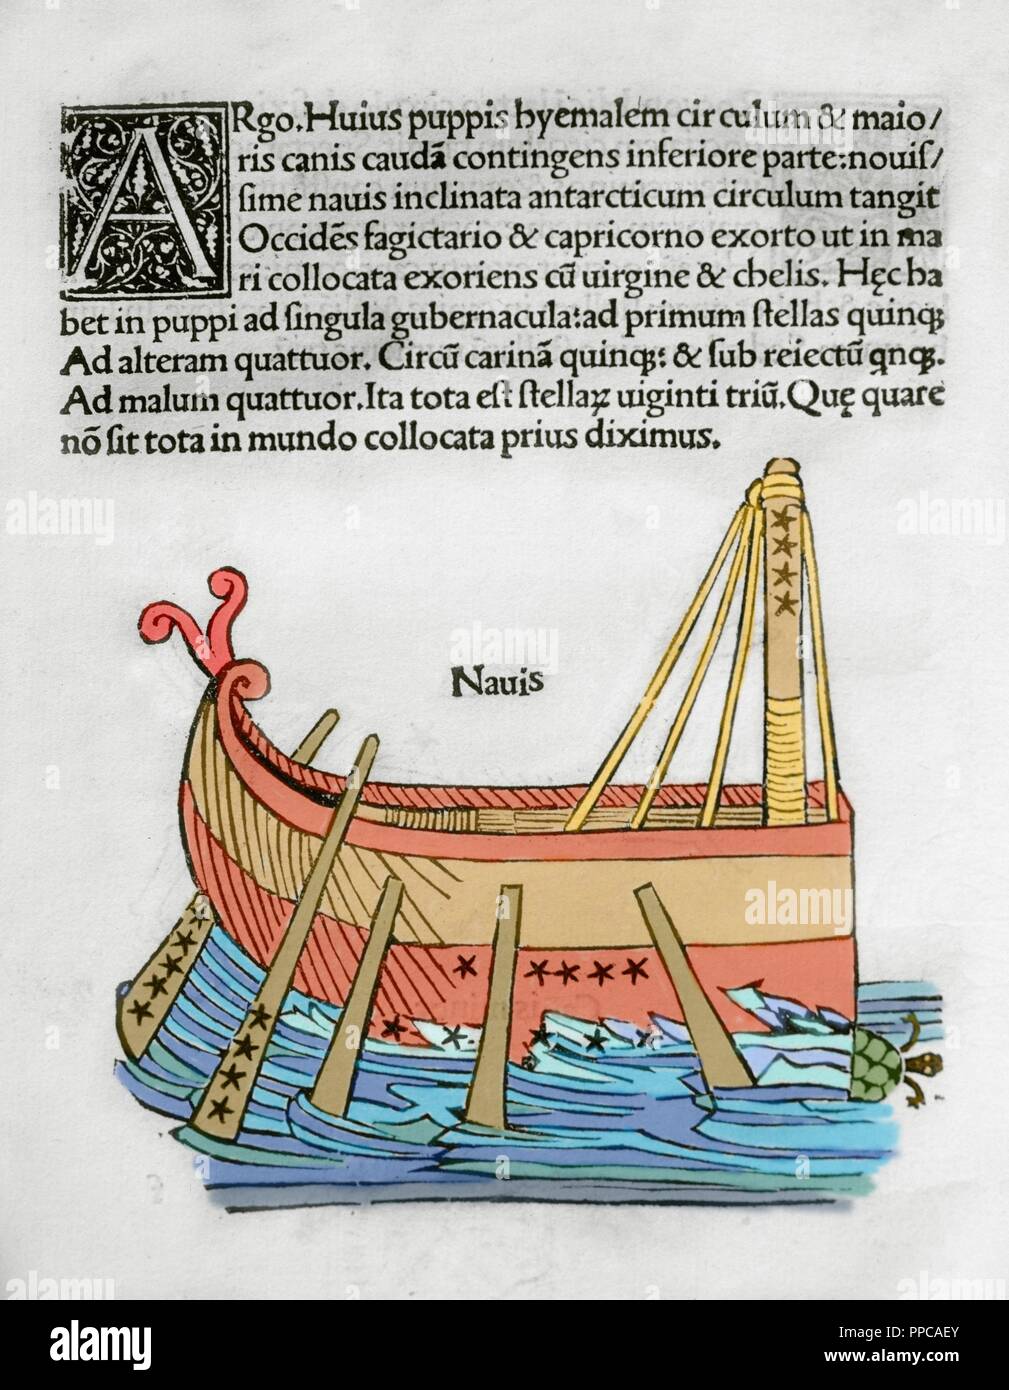 Argo Navis. Mythological interpretation of the constellation of the Southern Hemisphere, represented by the ship Argo, used by Jason and the Argonauts to retrieve the Golden Fleece. Engraving in Poeticon Astronomicon, by Gaius Julius Hyginus (ca.64 BC-17 AD). Edited in Venice, 1485. Incunable. Colored. Stock Photo